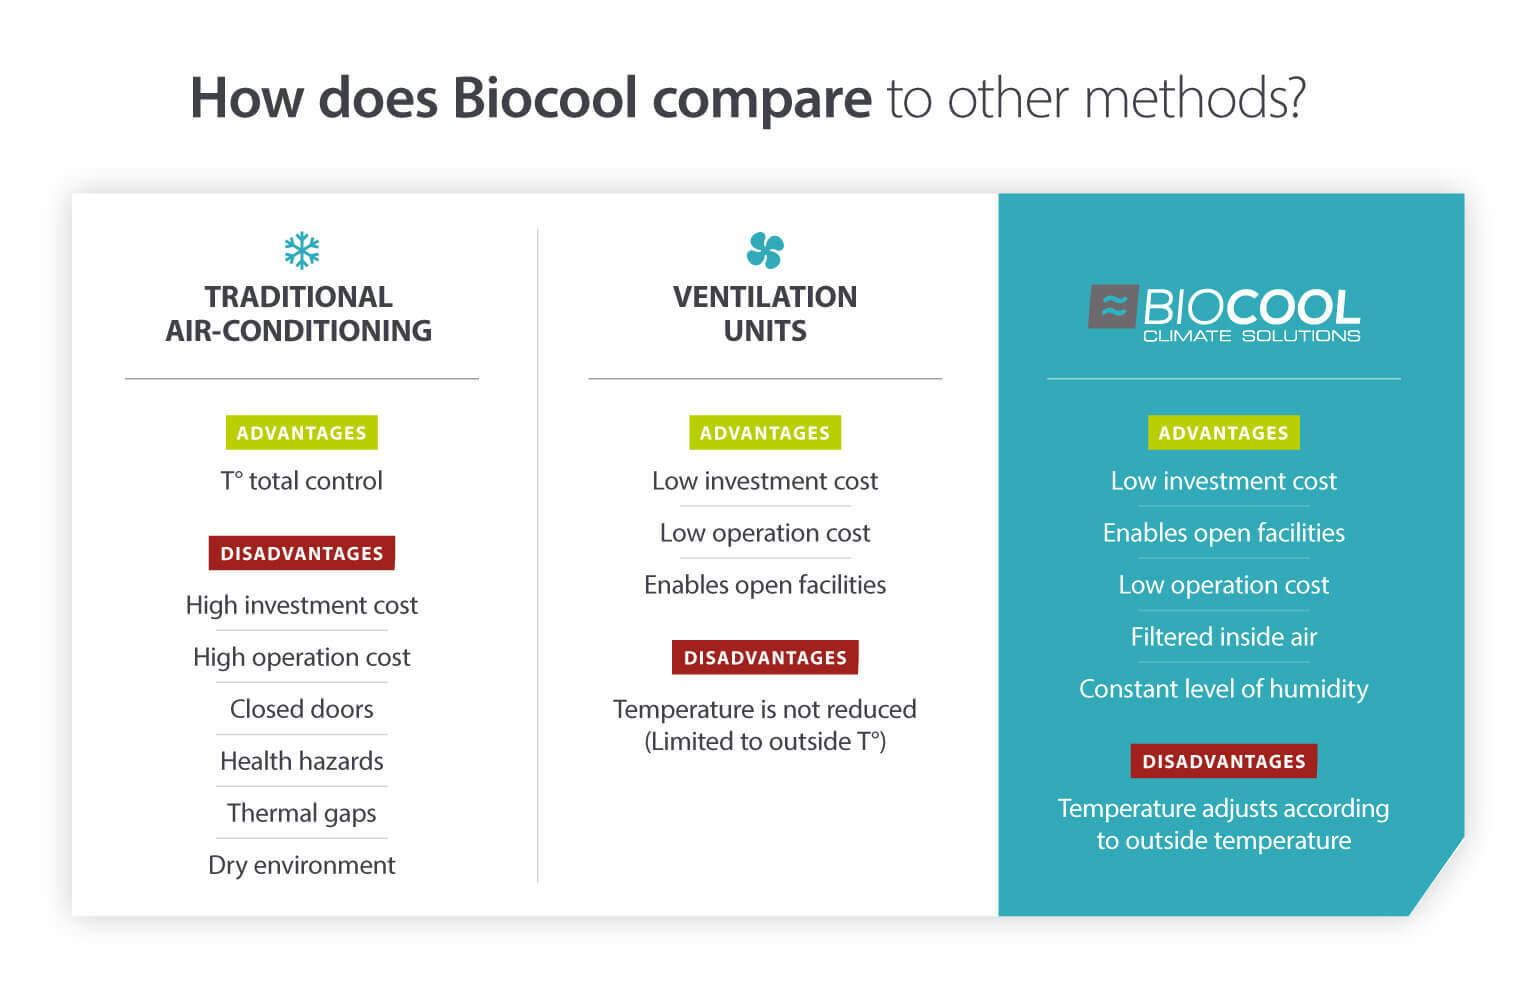 How does Biocool compare